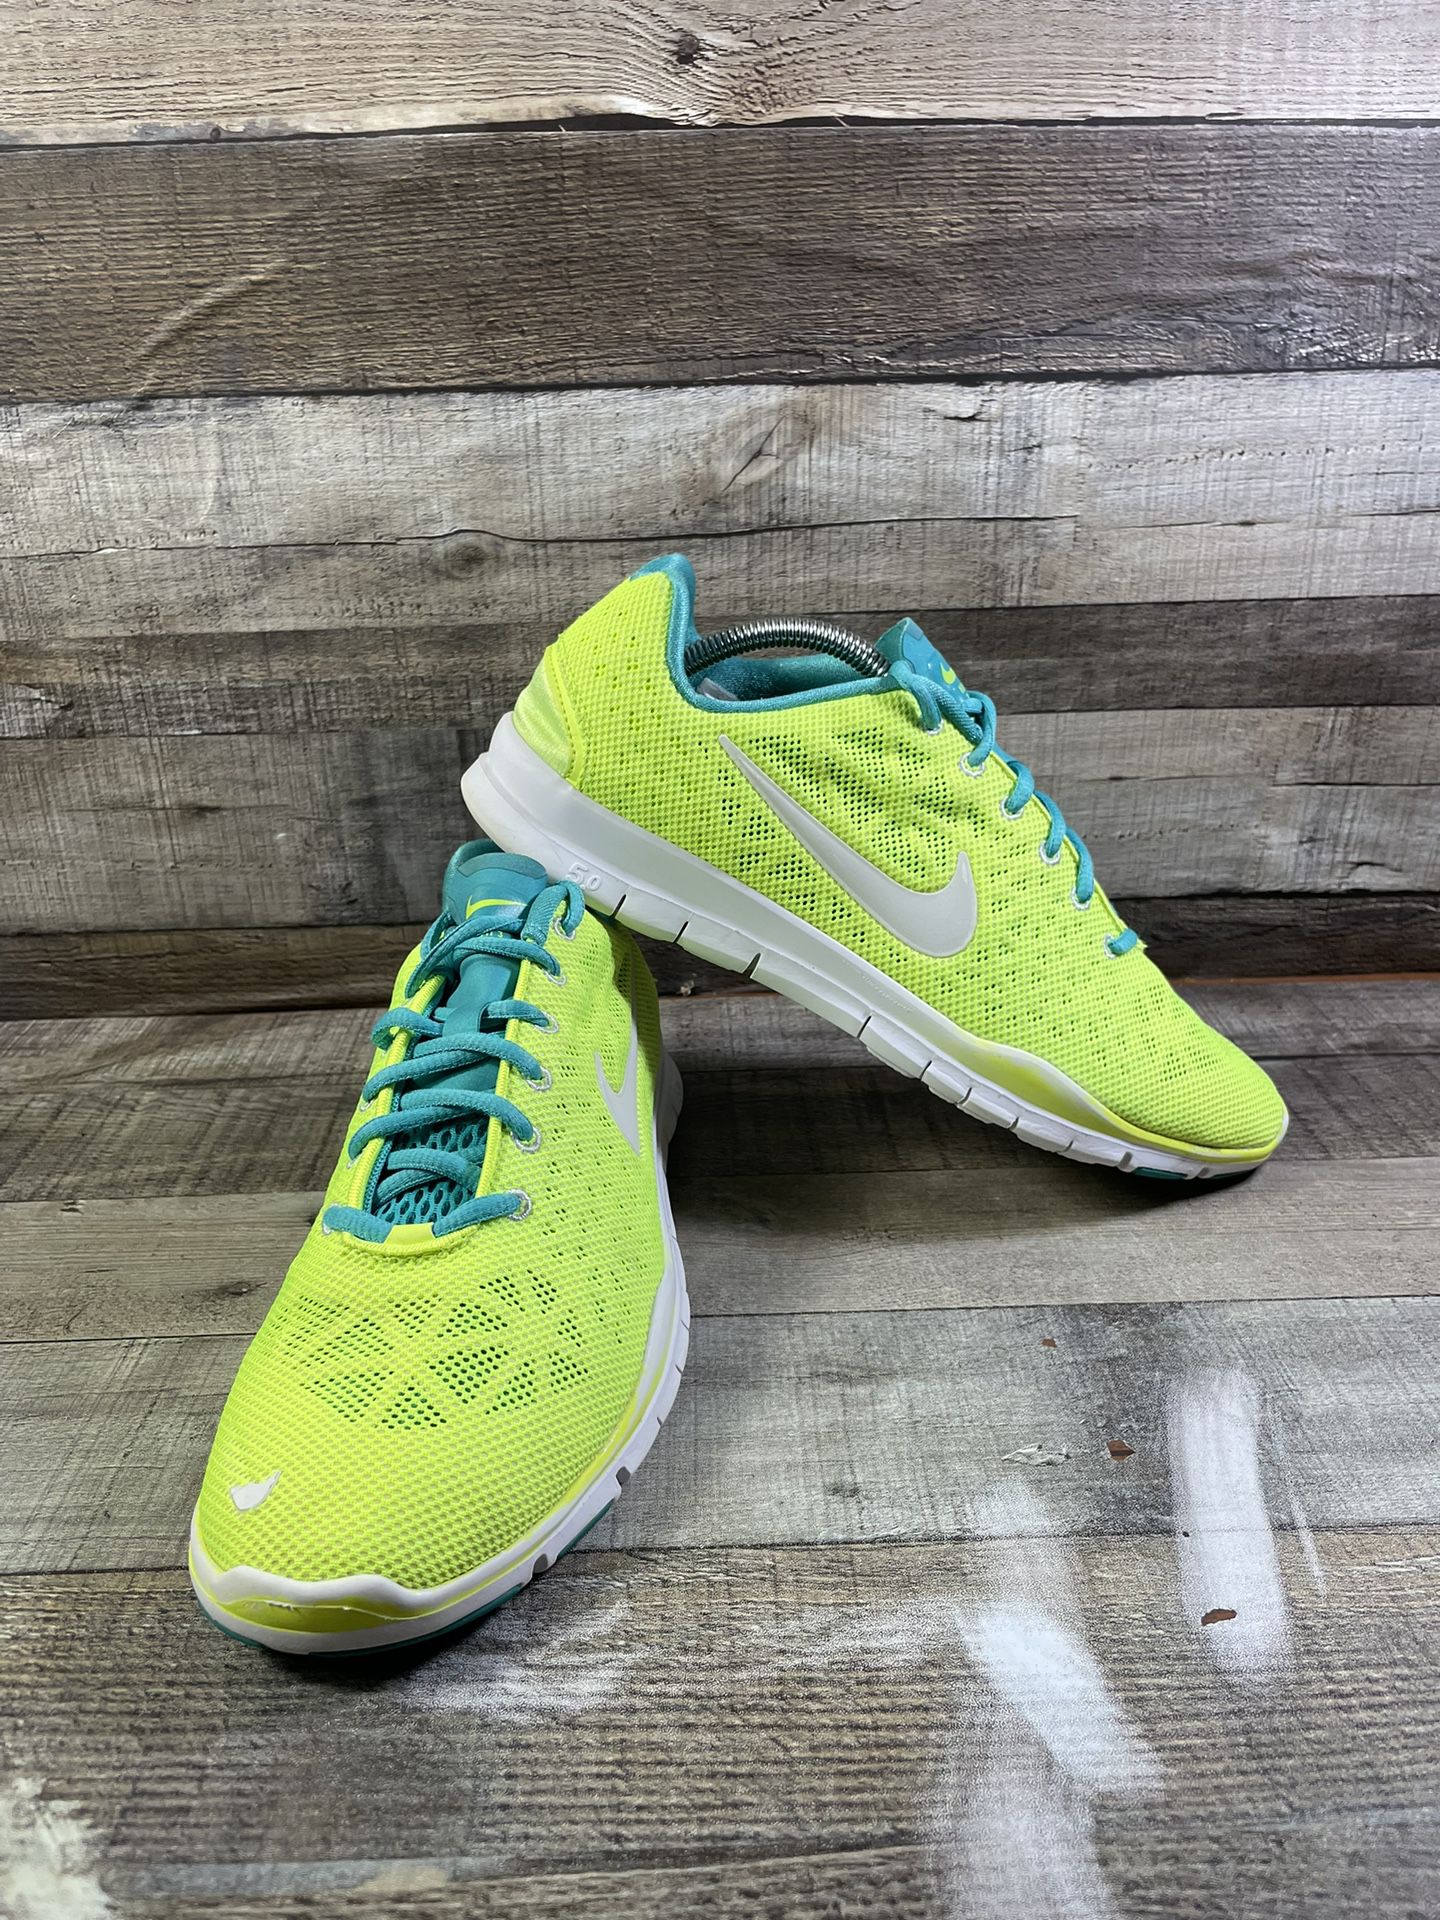 sammenbrud prioritet Forberedelse Nike Free TR Fit 3 Breathe women's Neon Gym Training Shoes Size 11.5 for  Sale in Irving, TX - OfferUp